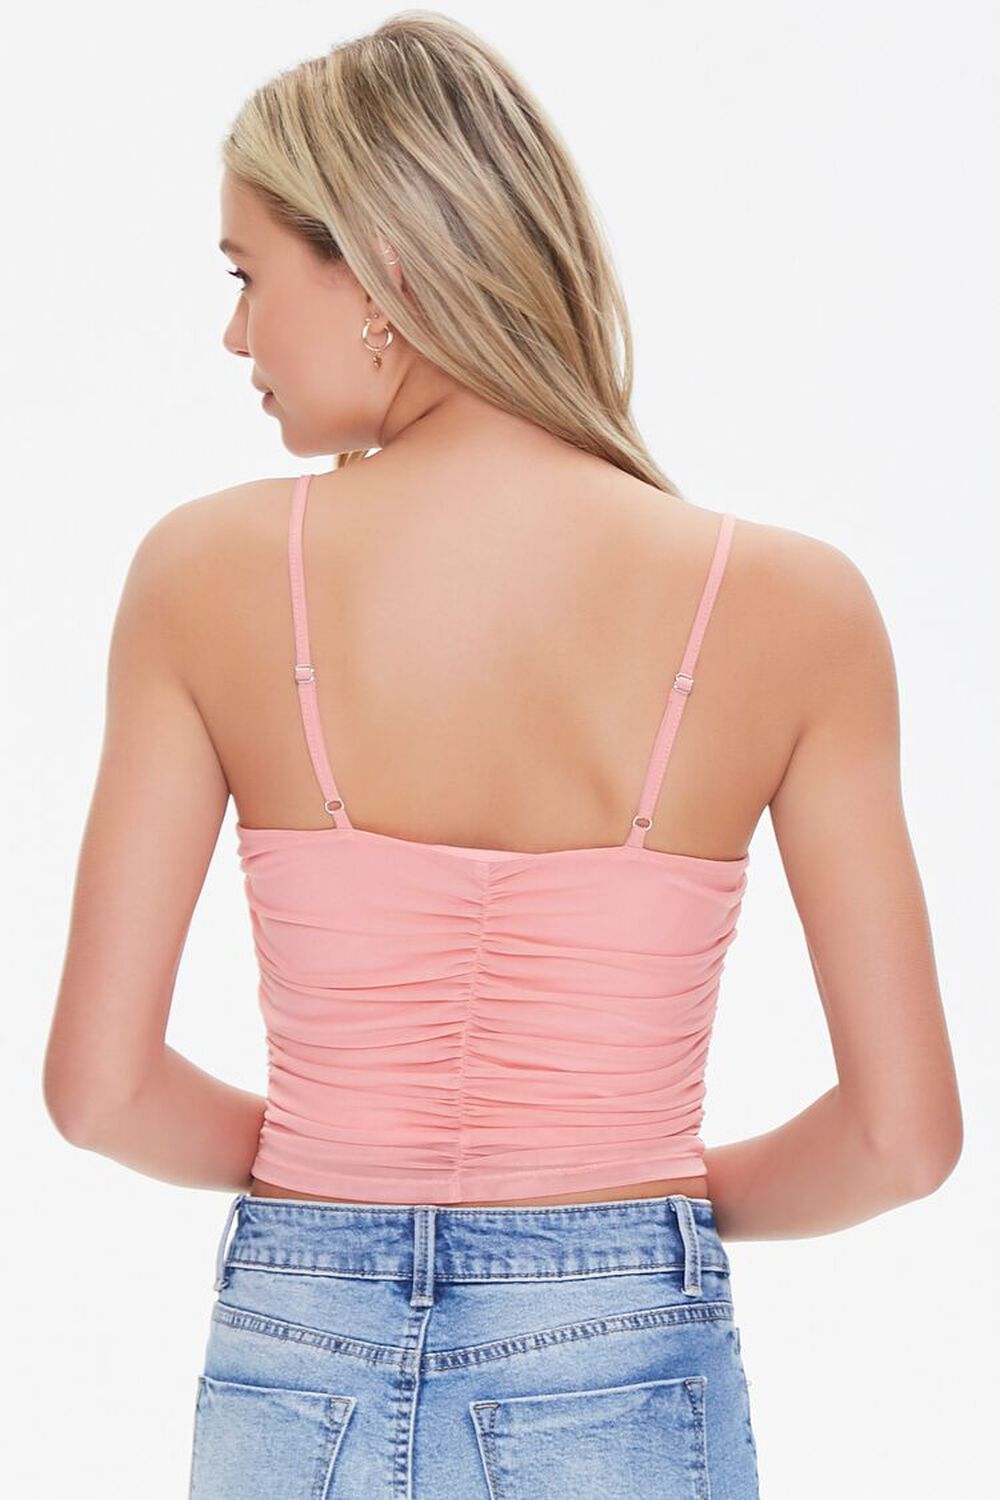 ROSE Ruched Cropped Cami, image 3